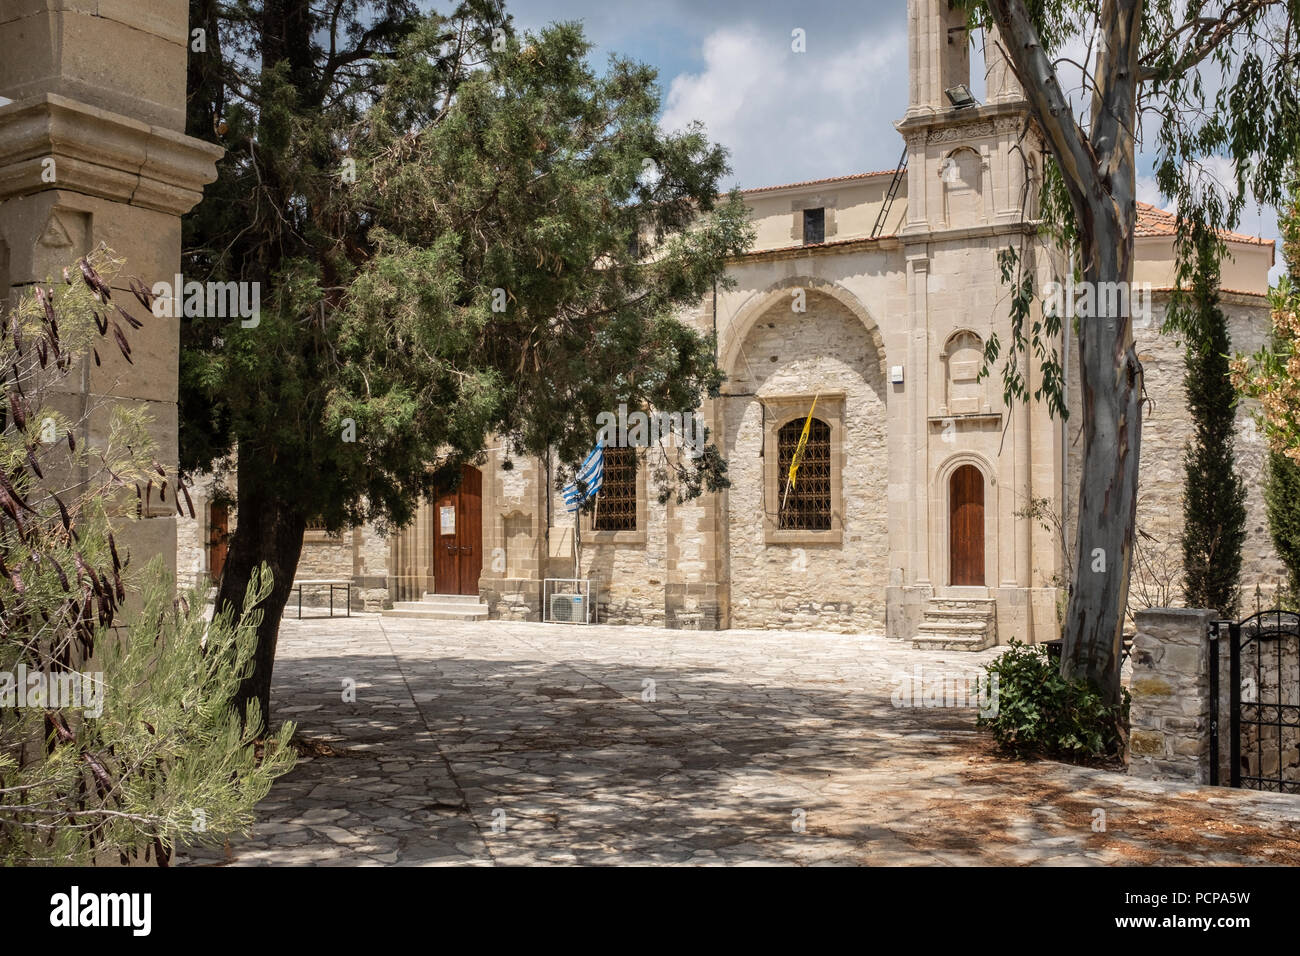 Entrance to St George's Church. Situated in the picturesque village of Vavla, Larnaca region of Cyprus Stock Photo